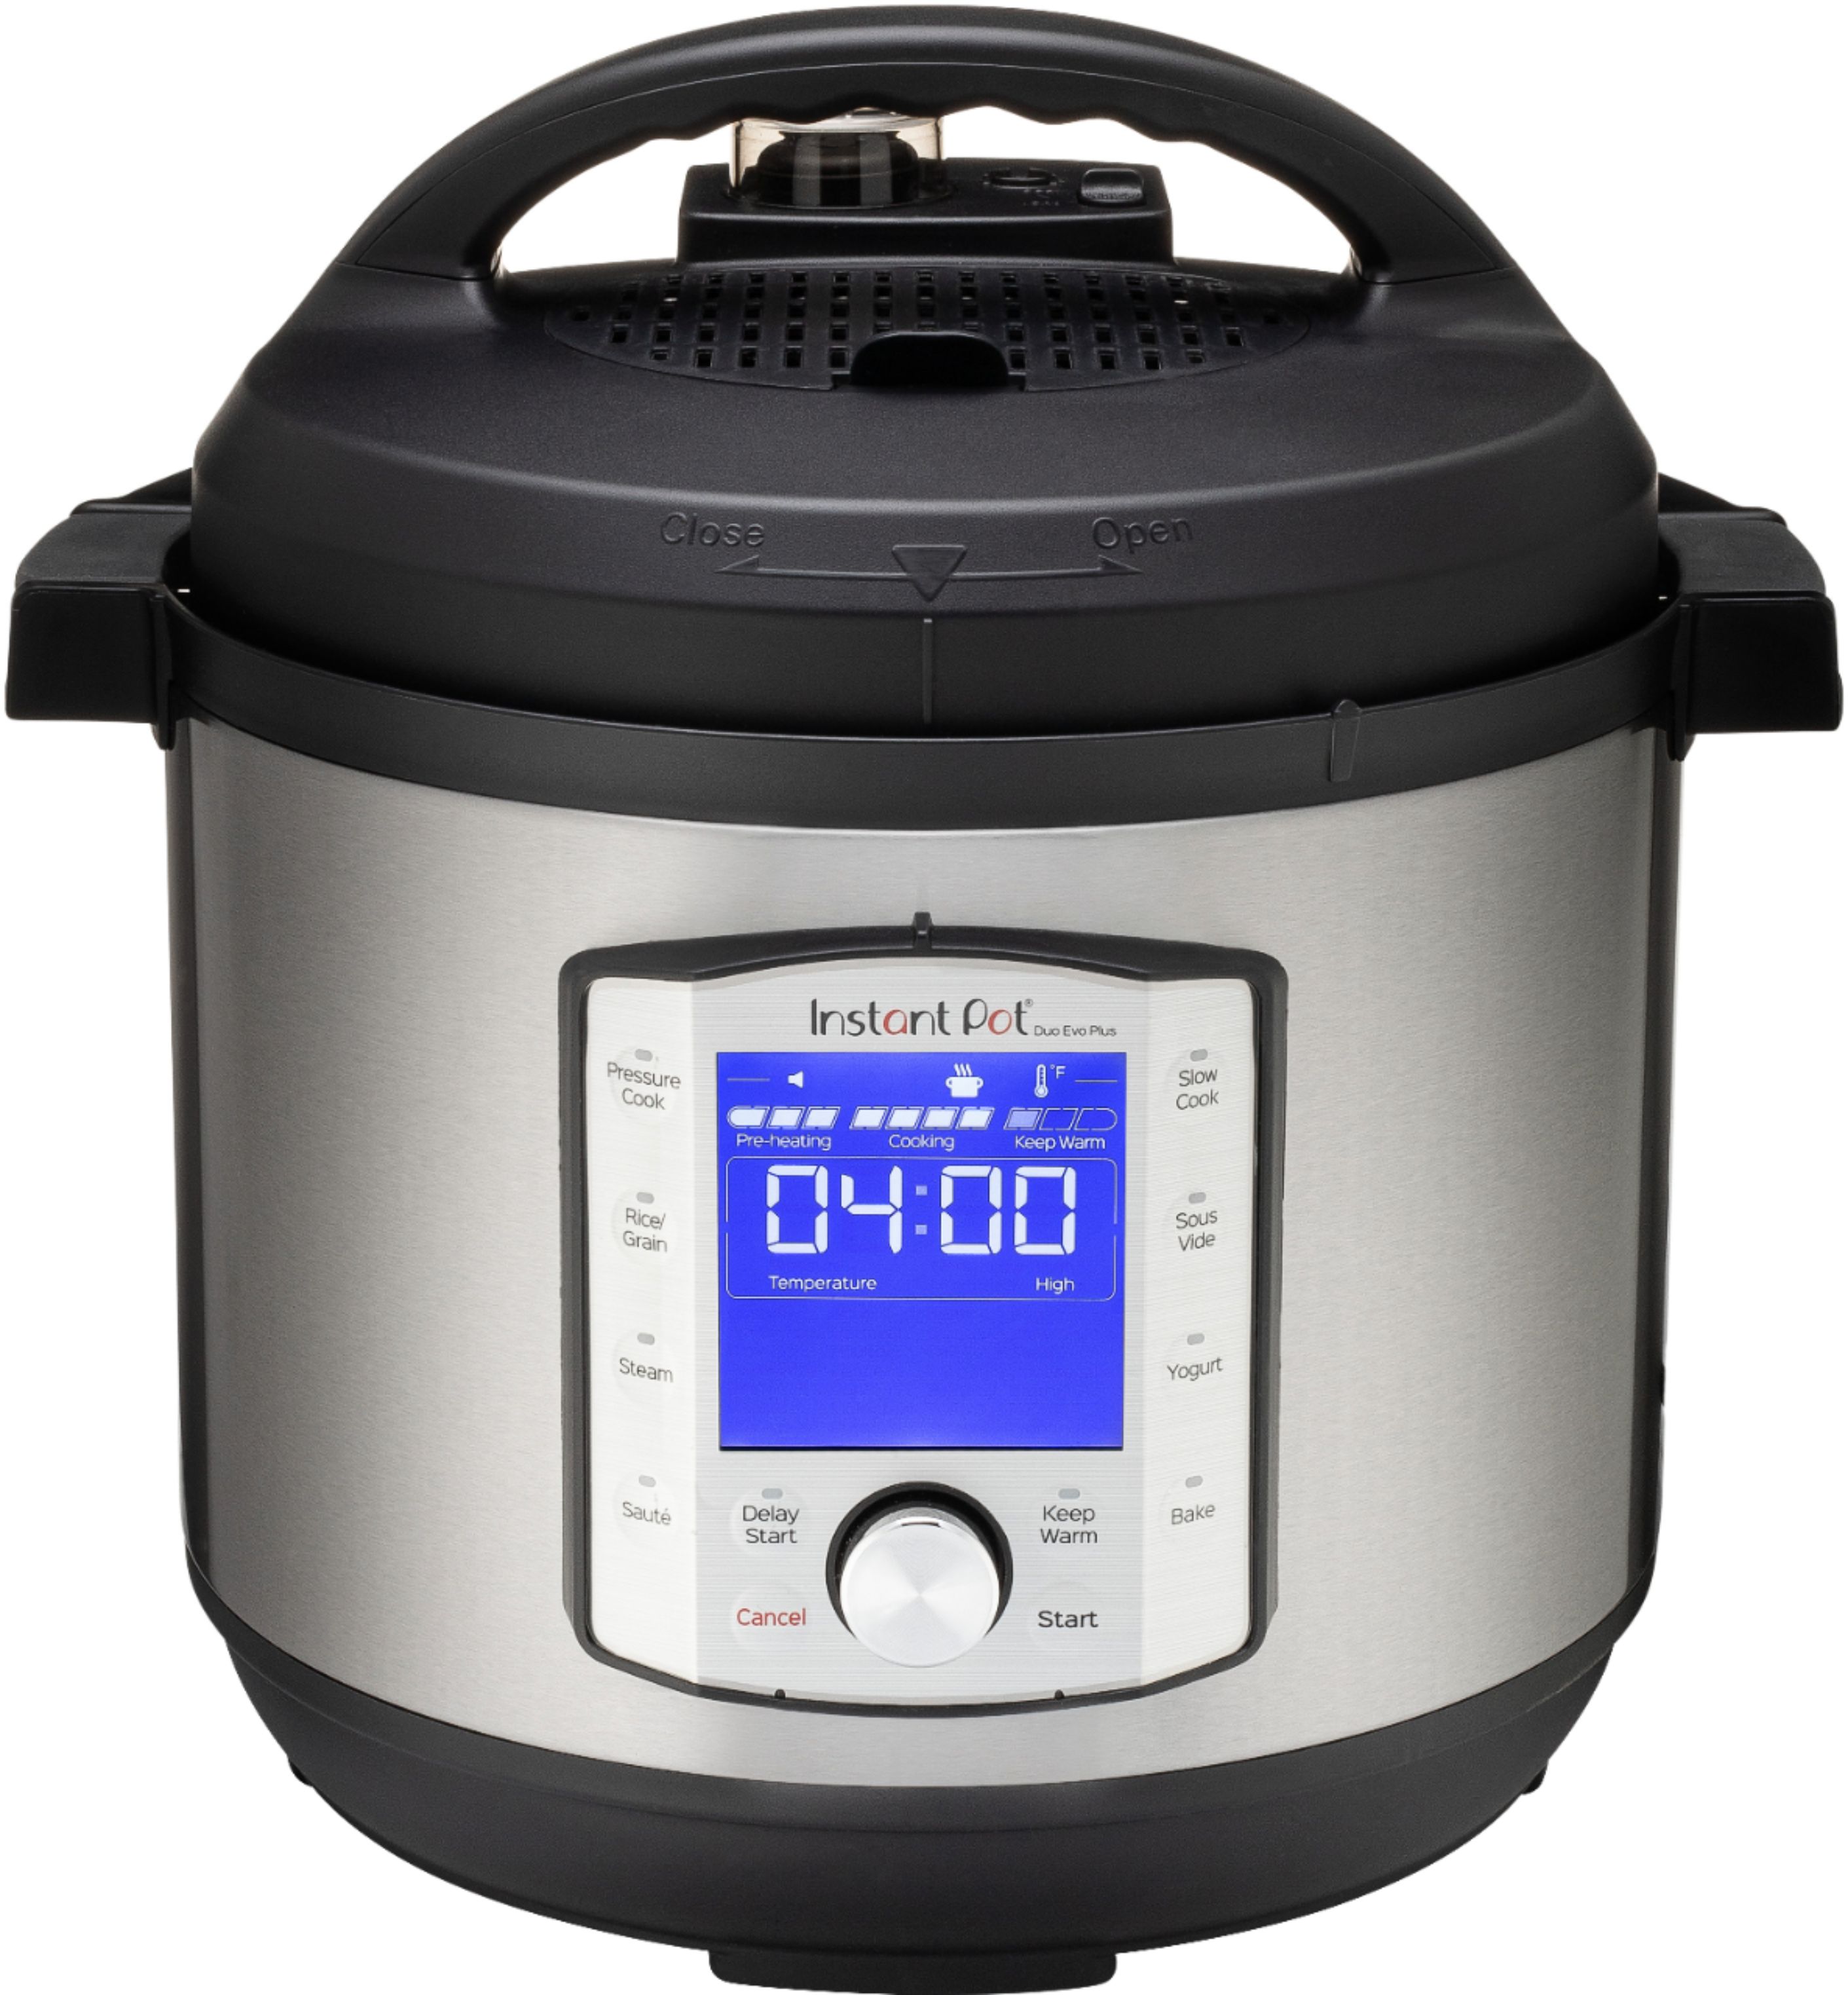 Questions and Answers: Instant Pot Duo Evo Plus 8qt Multi Cooker ...